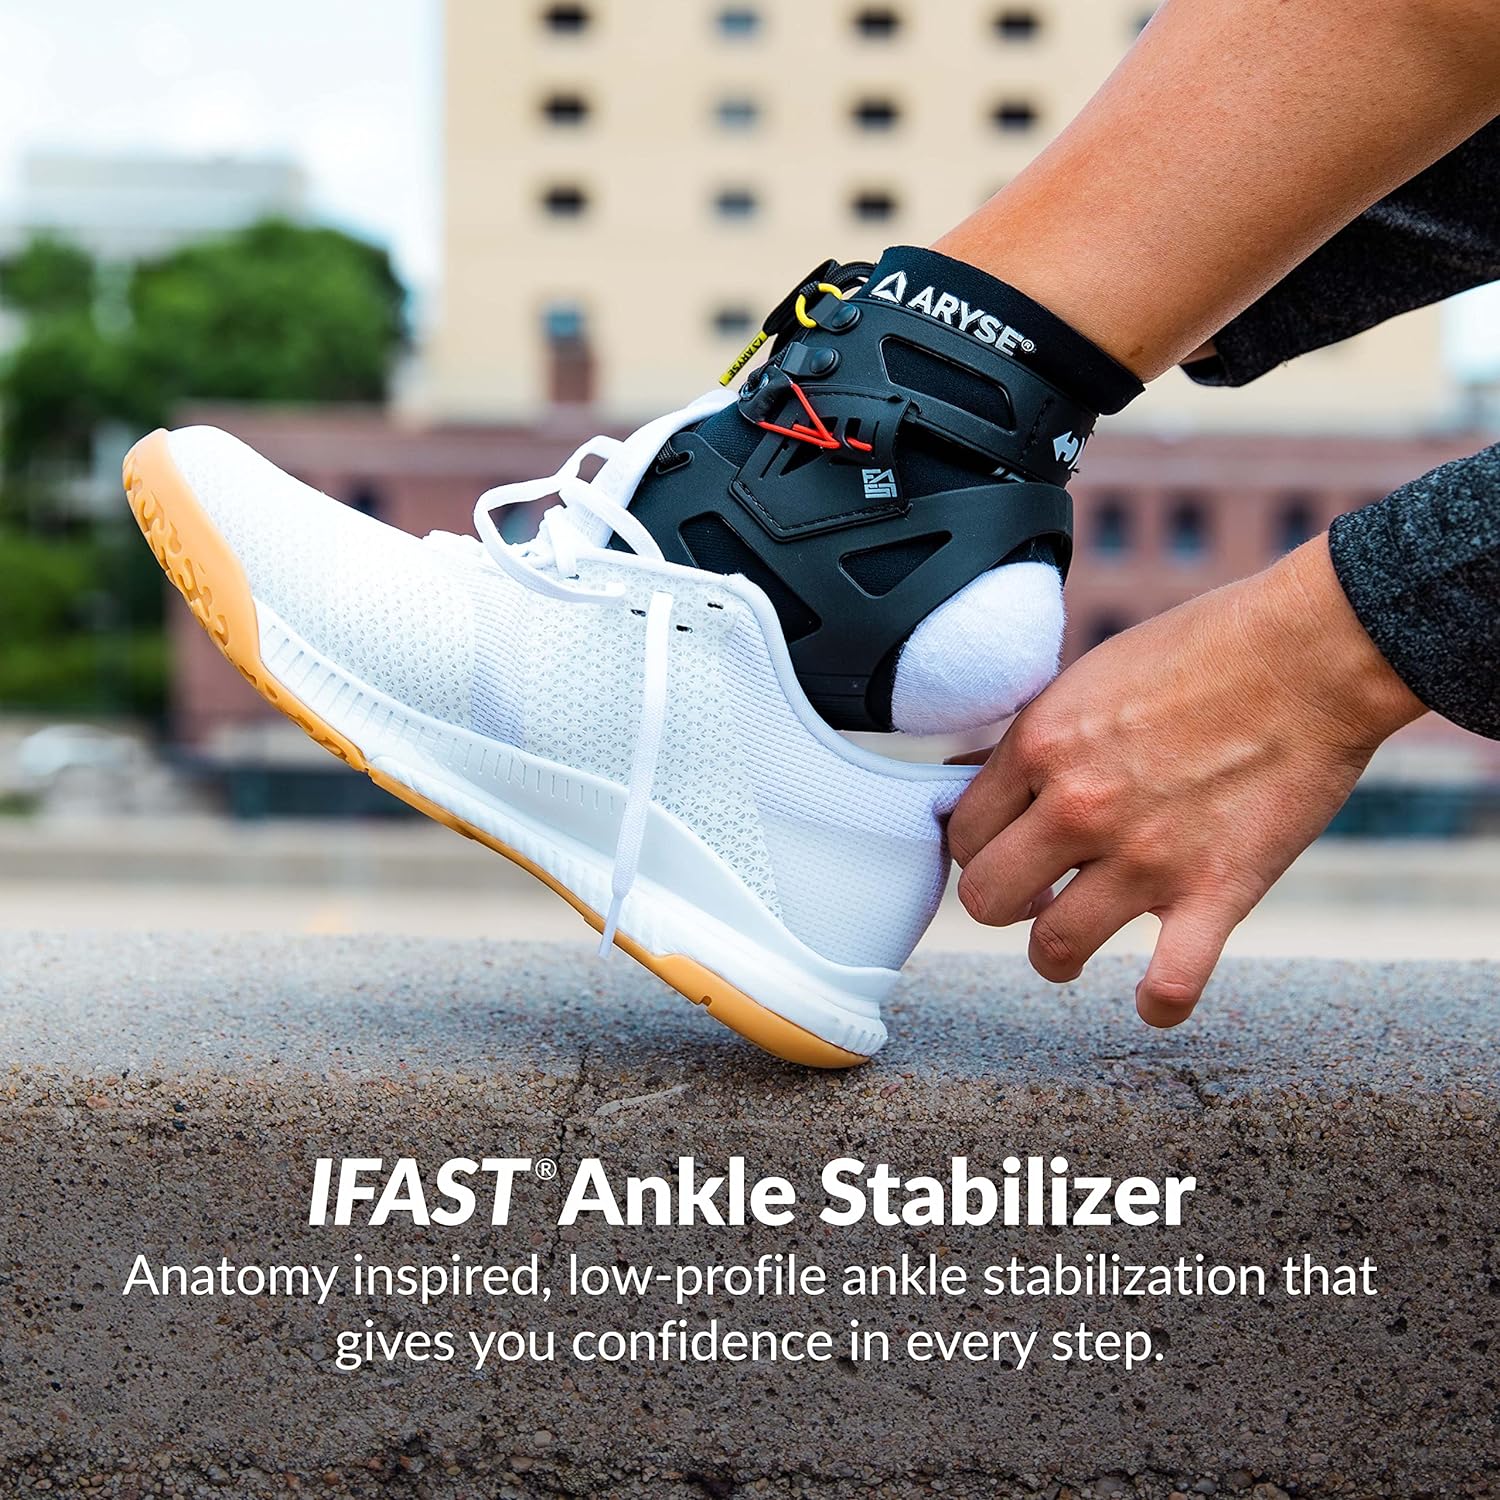 Generic ARYSE IFAST - Ankle Stabilizer Brace - Superior Ankle Support for Men and Women. Basketball, Baseball, Running, Football, Volle